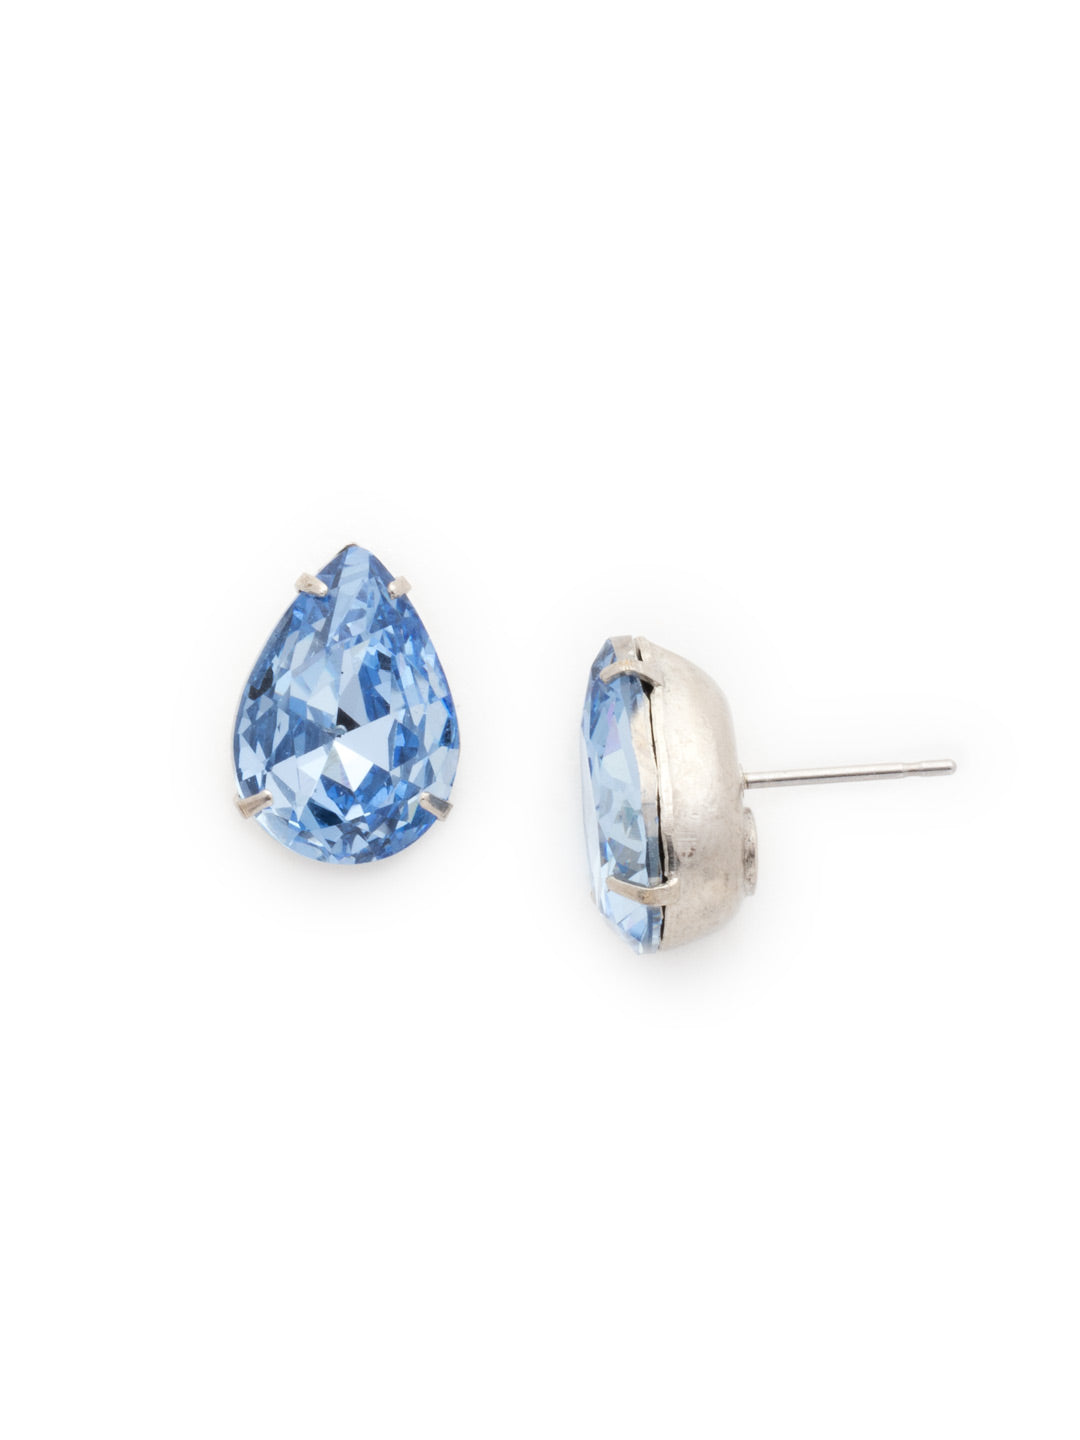 Ginnie Stud Earrings - ECR115ASIB - <p>A beautiful basic stud. These classic single teardrop post earrings are perfect for any occasion, especially the everyday look. A timeless treasure that will sparkle season after season. From Sorrelli's Ice Blue collection in our Antique Silver-tone finish.</p>